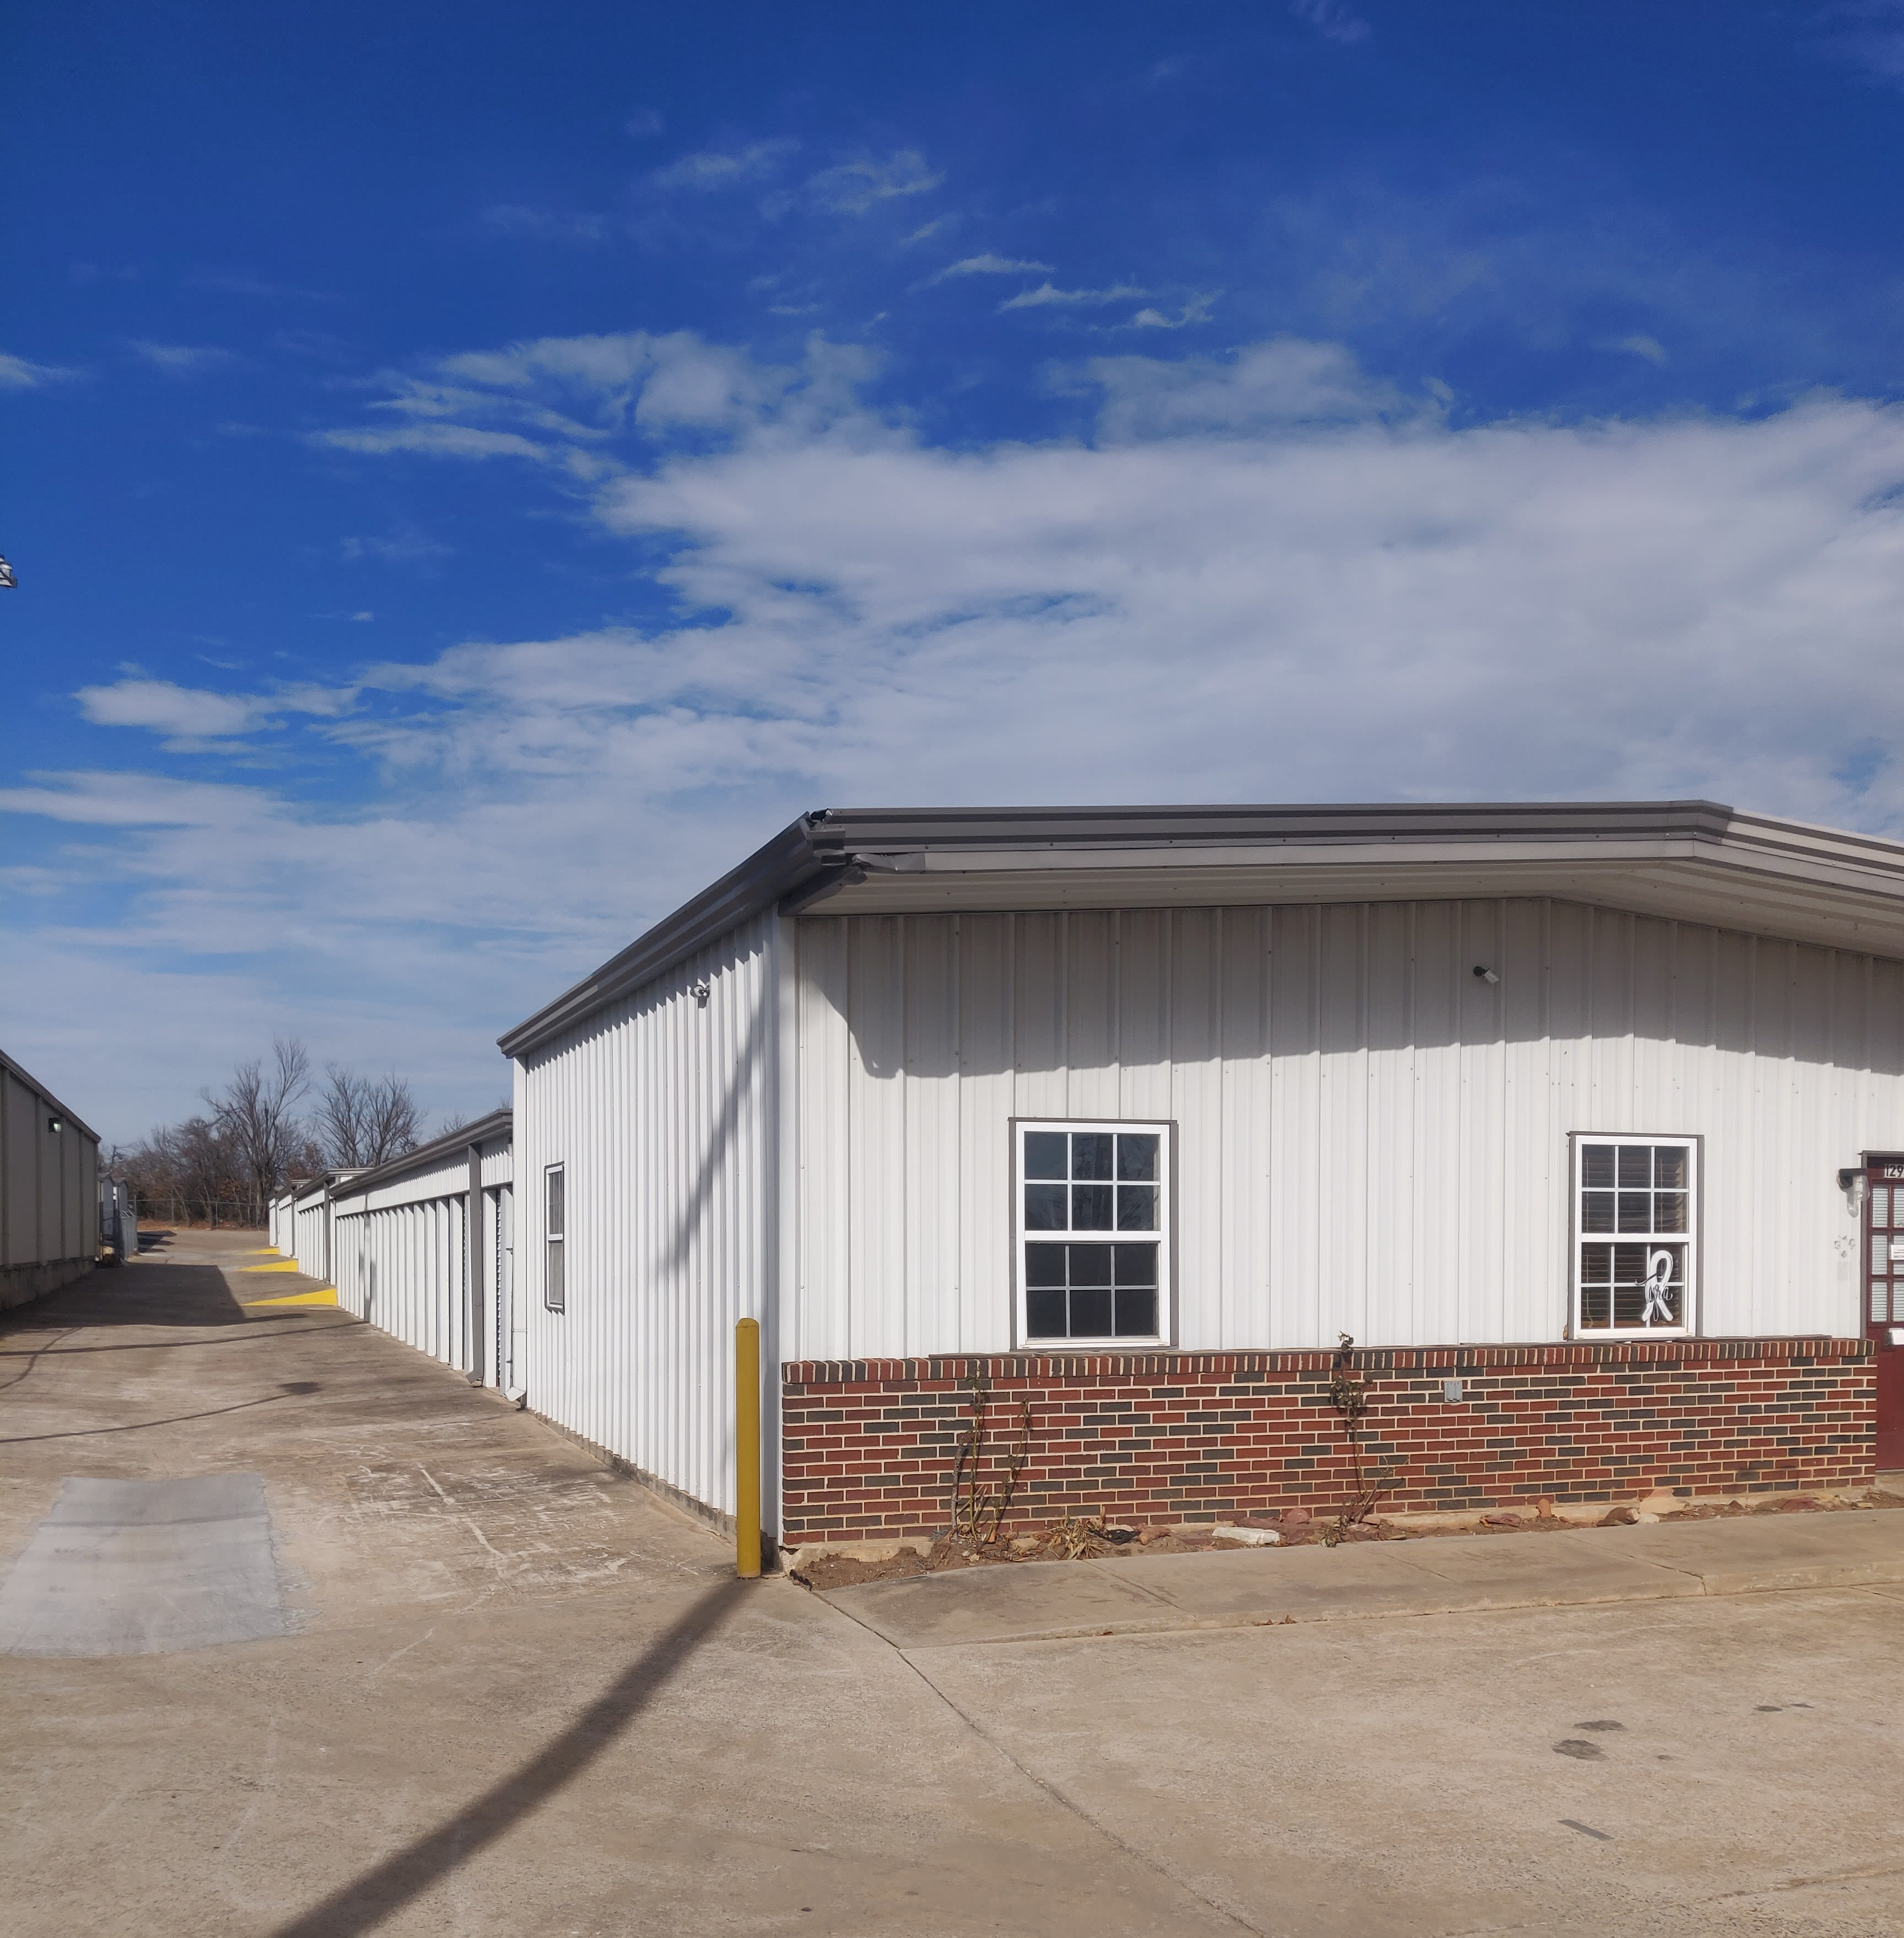 View our hours and directions at KO Storage in Jones, Oklahoma